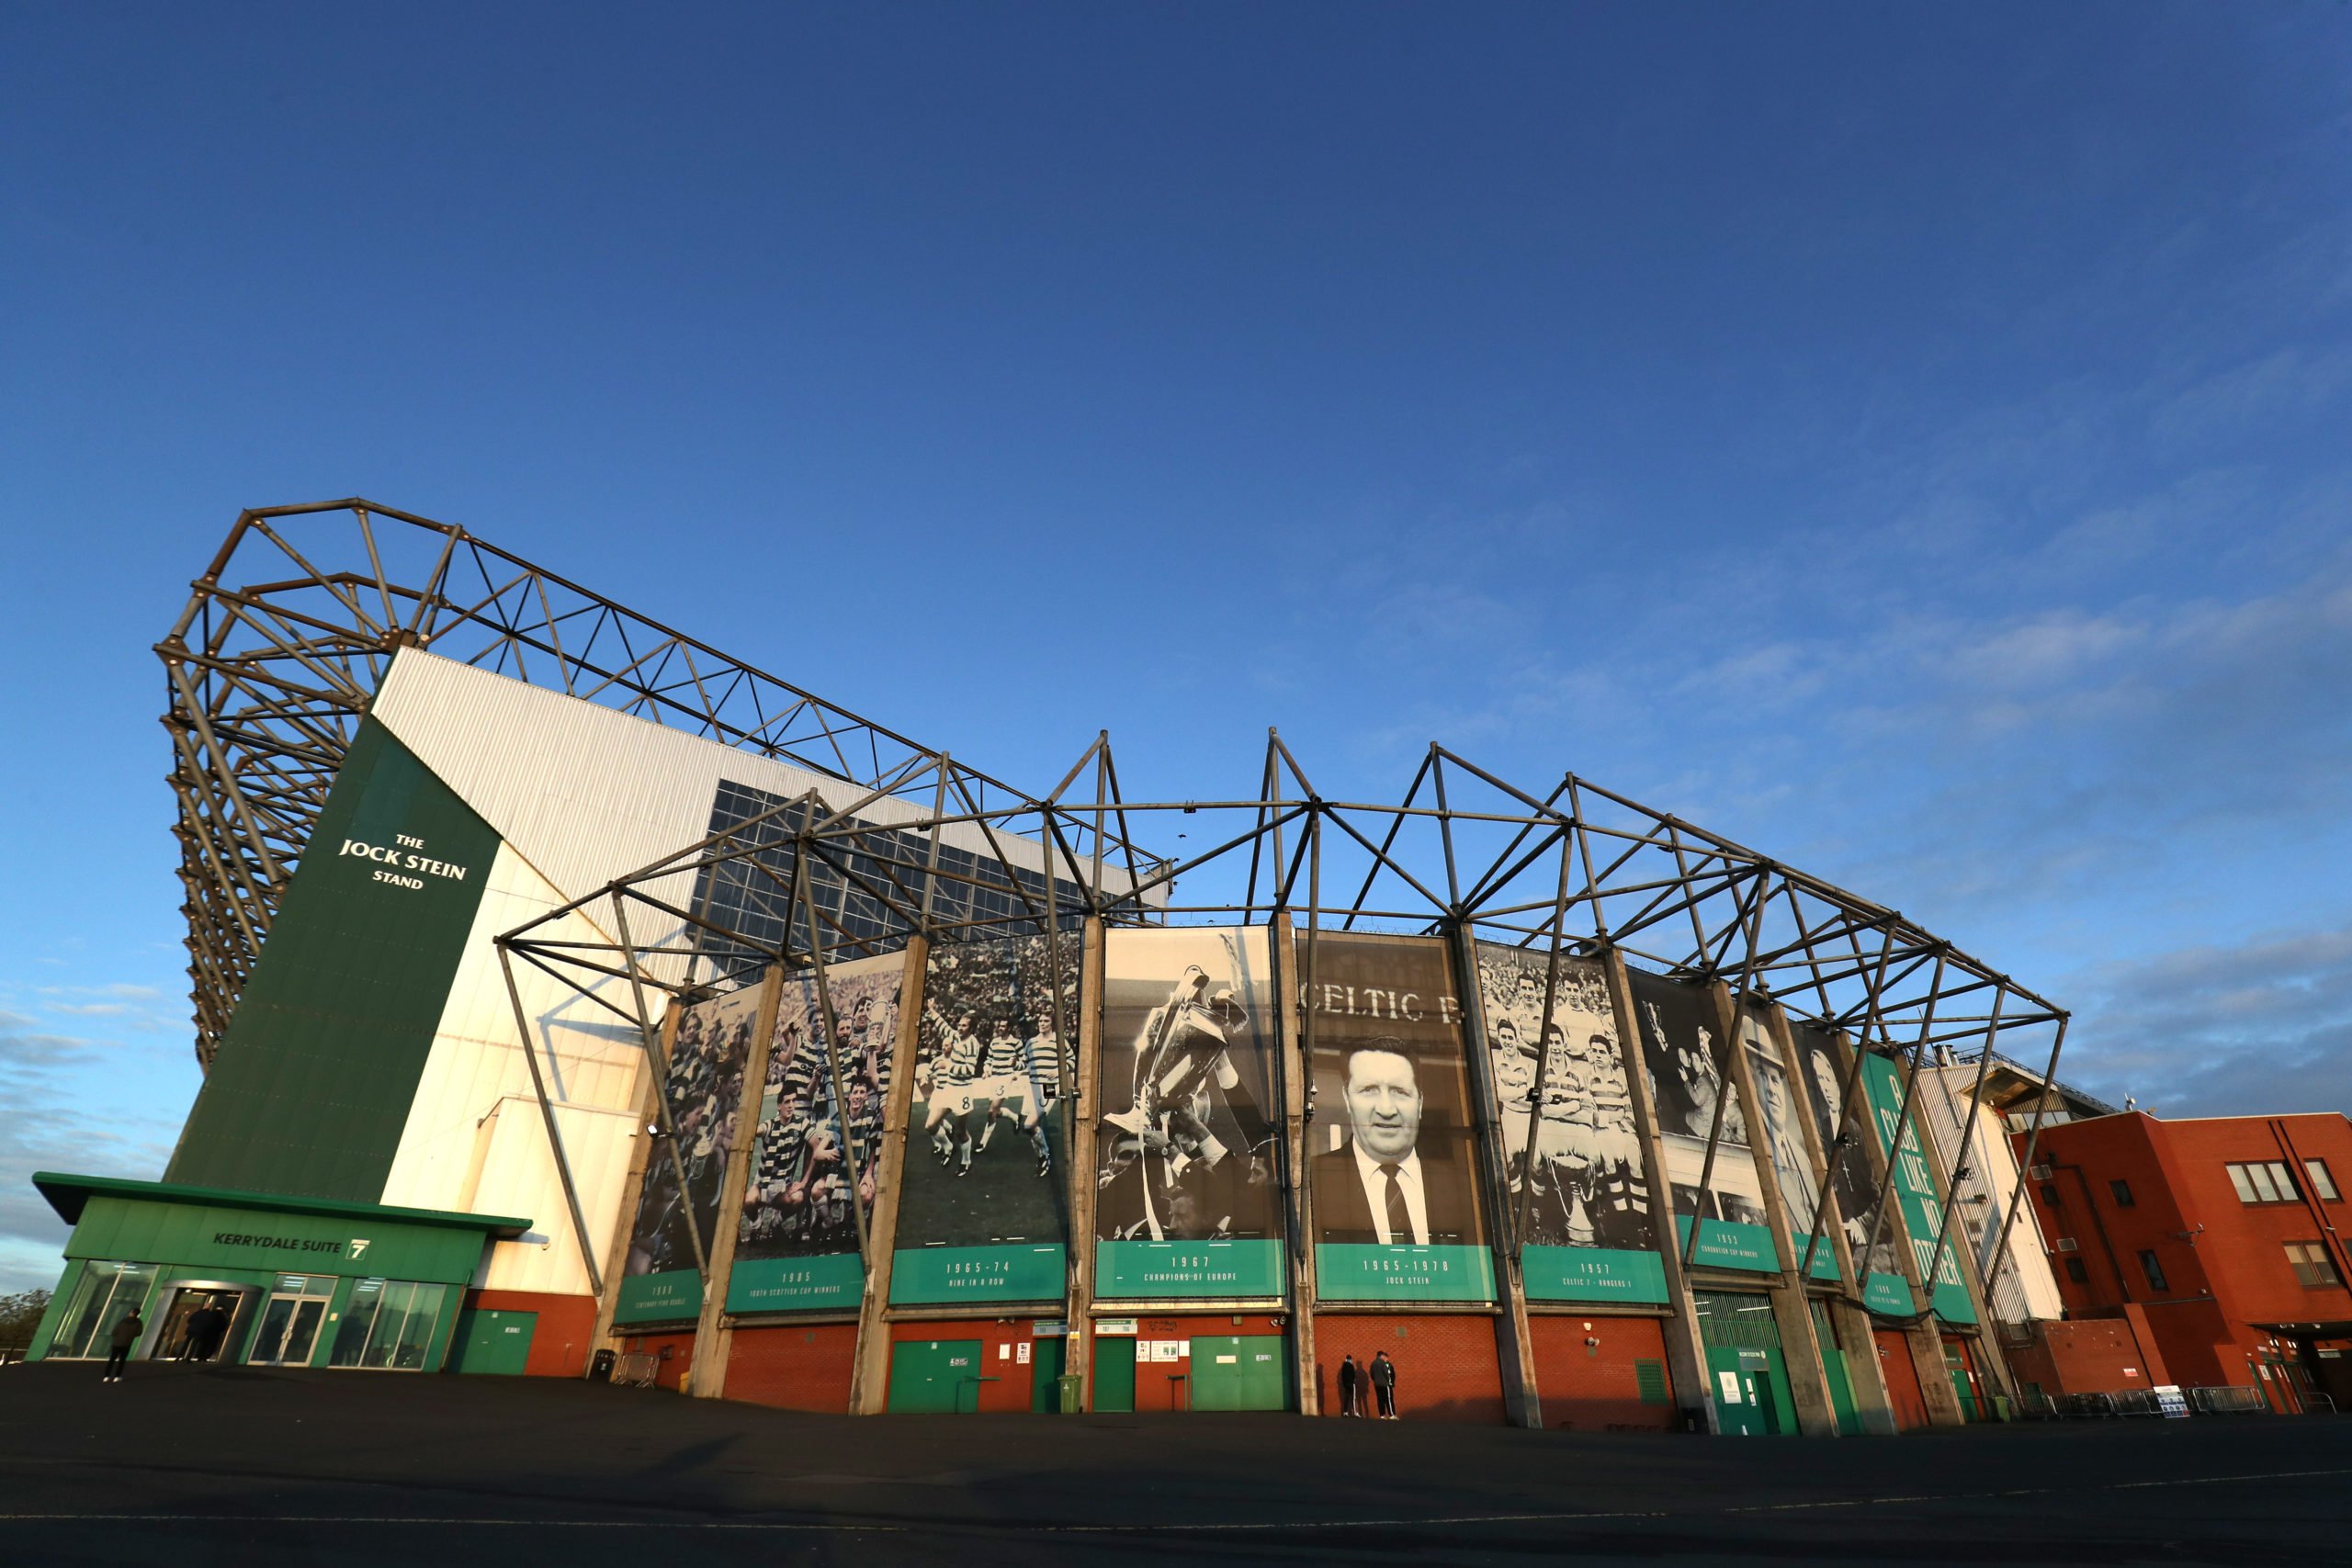 Investment group explain why they're playing long game with Celtic shares; address Super League